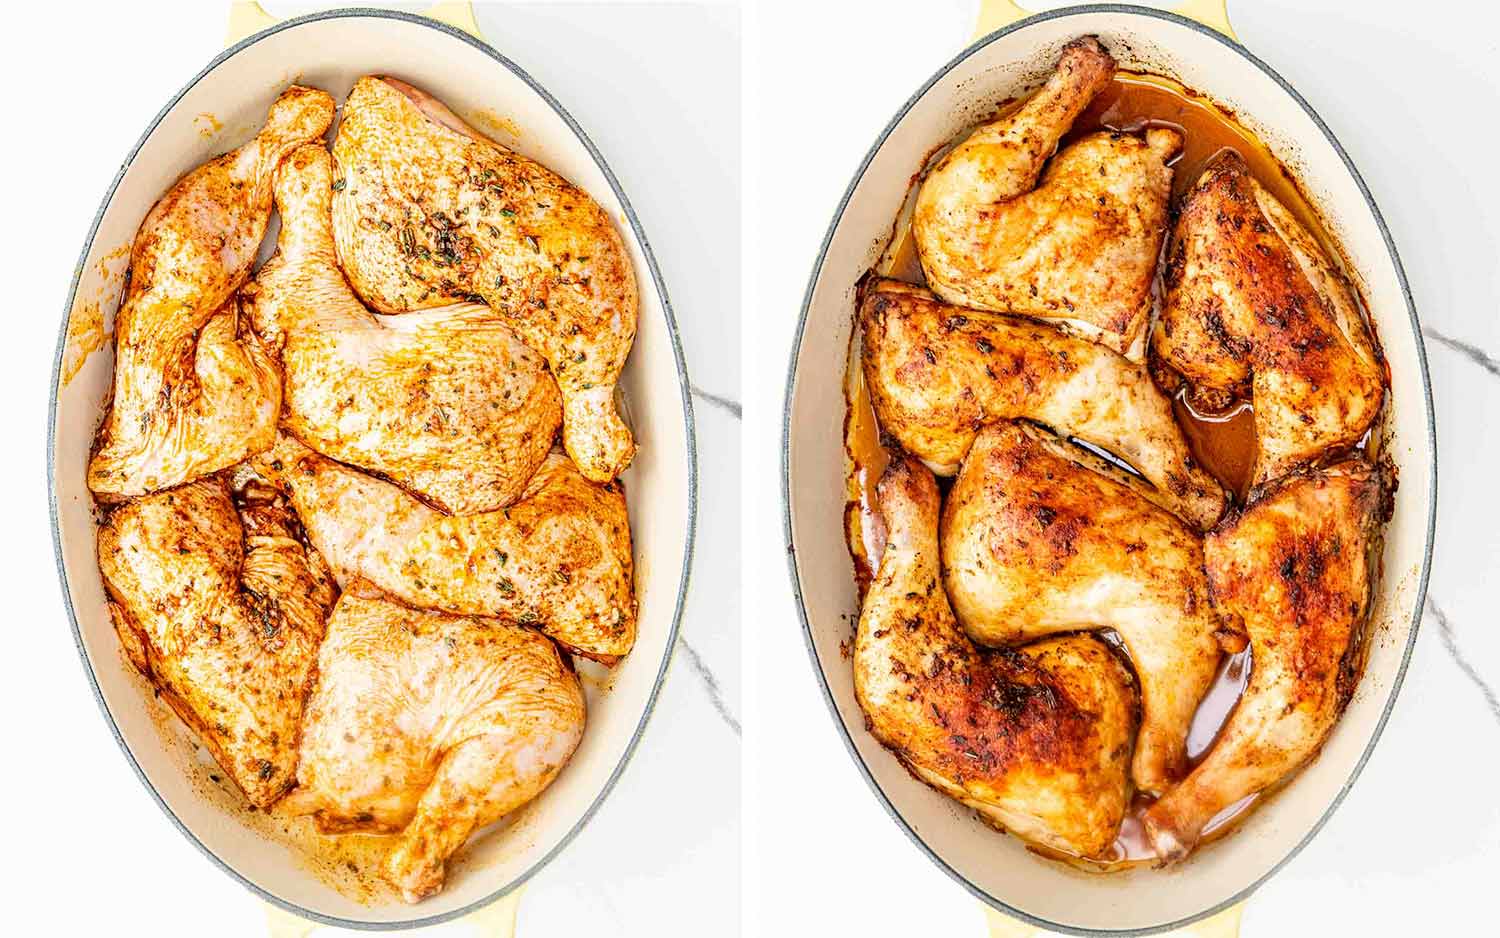 process shots showing how to make baked chicken legs.